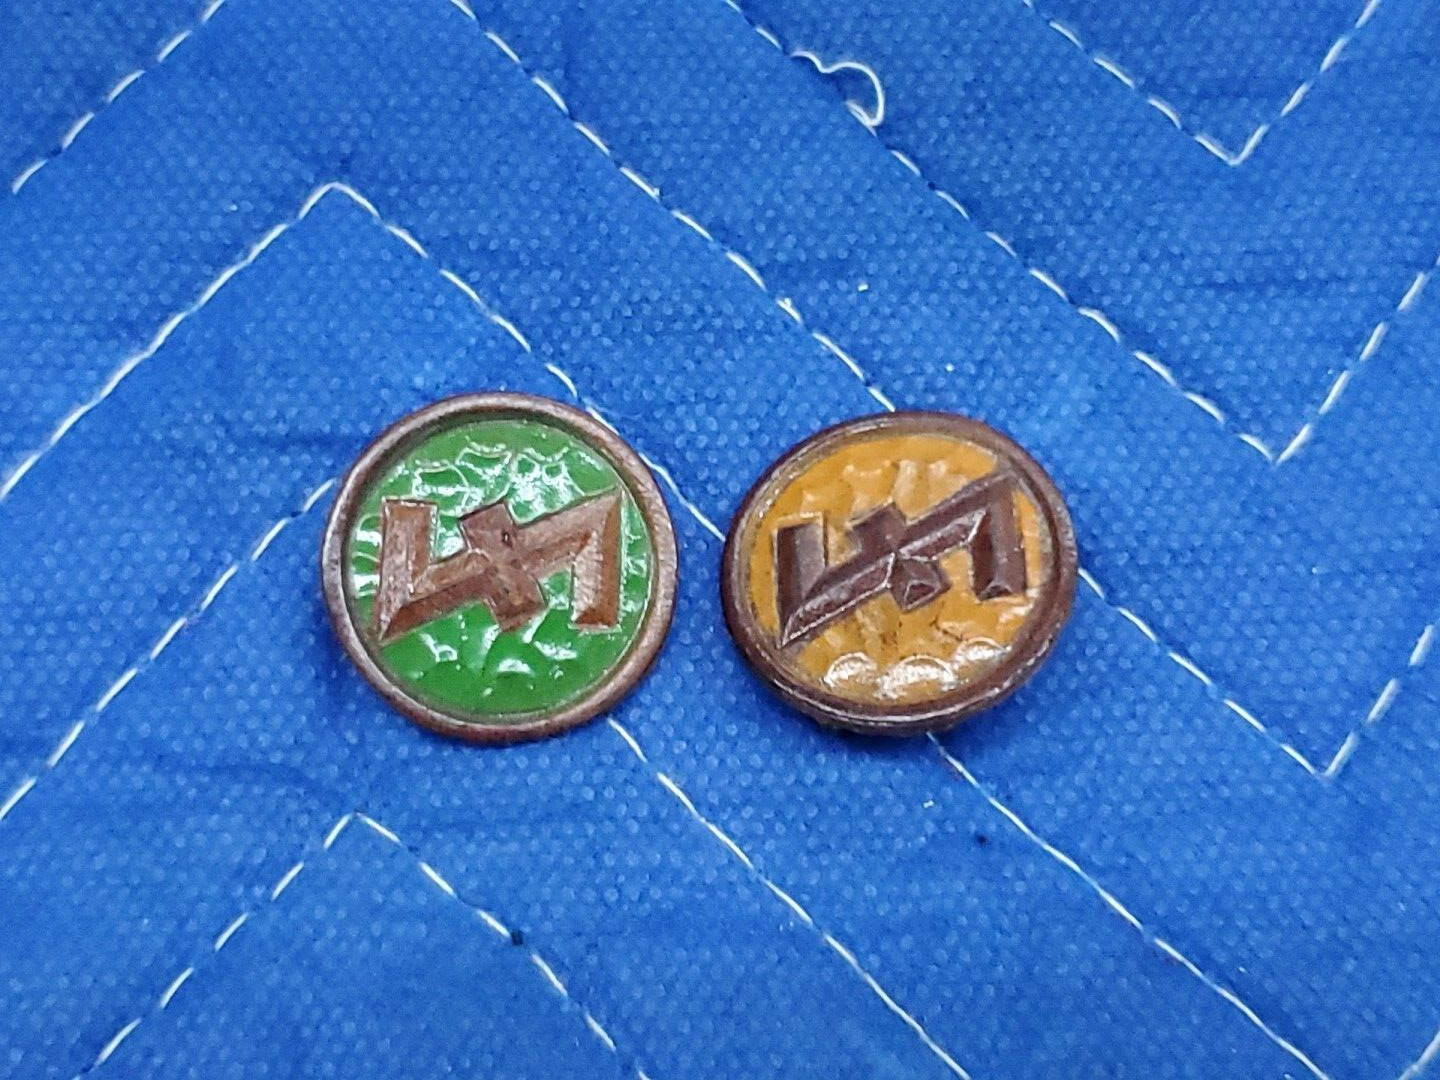 2 Vintage WW2 German Wolfsangle Rune Badges SS Panzer Division?   Ships Free